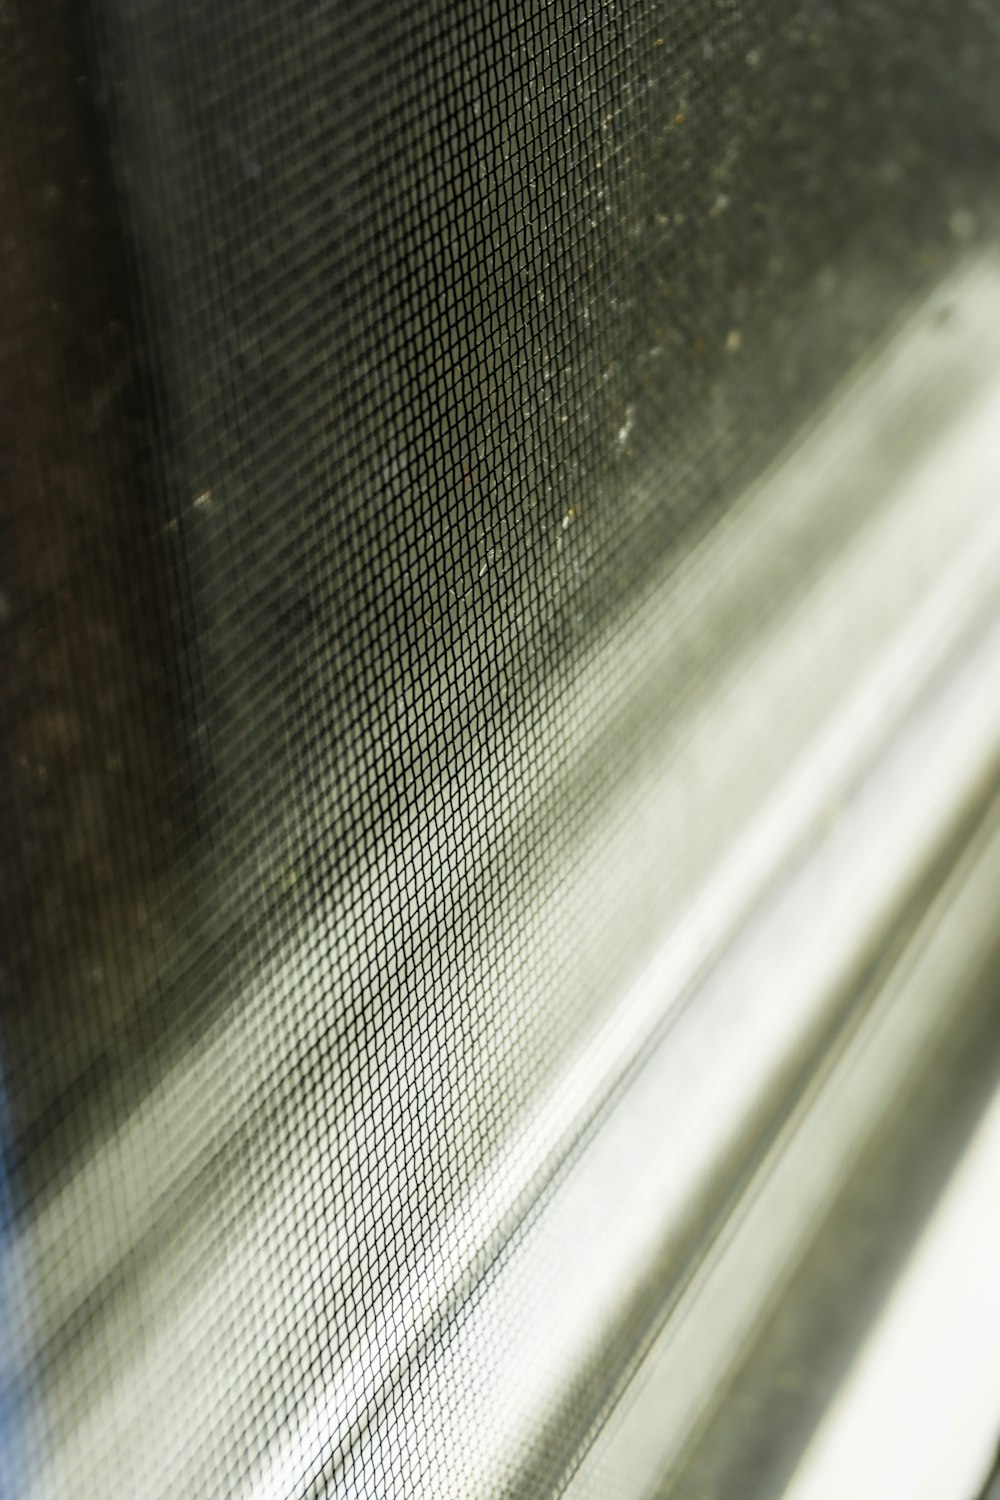 a close up of a window with a blurry background